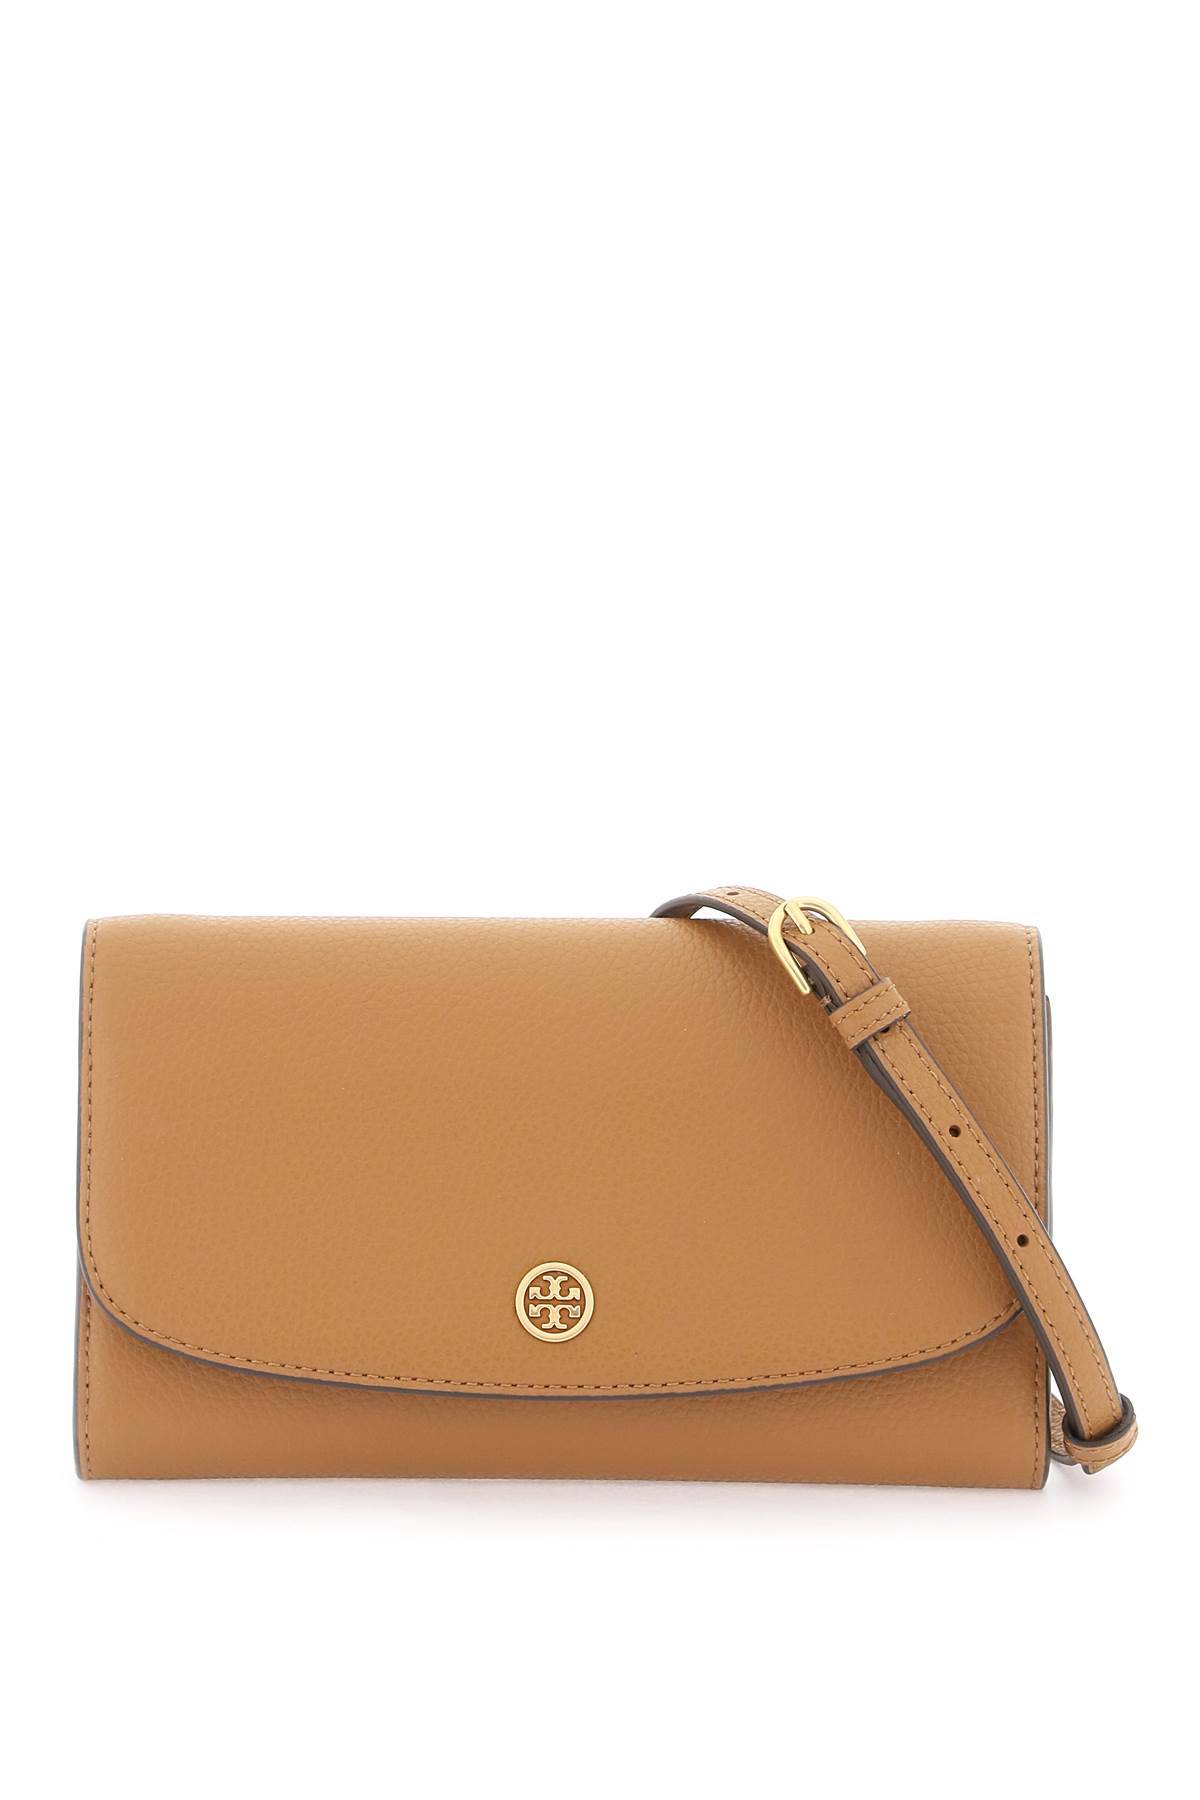 Tory Burch Mini Robinson Shoulder Bag With Strap In Brown